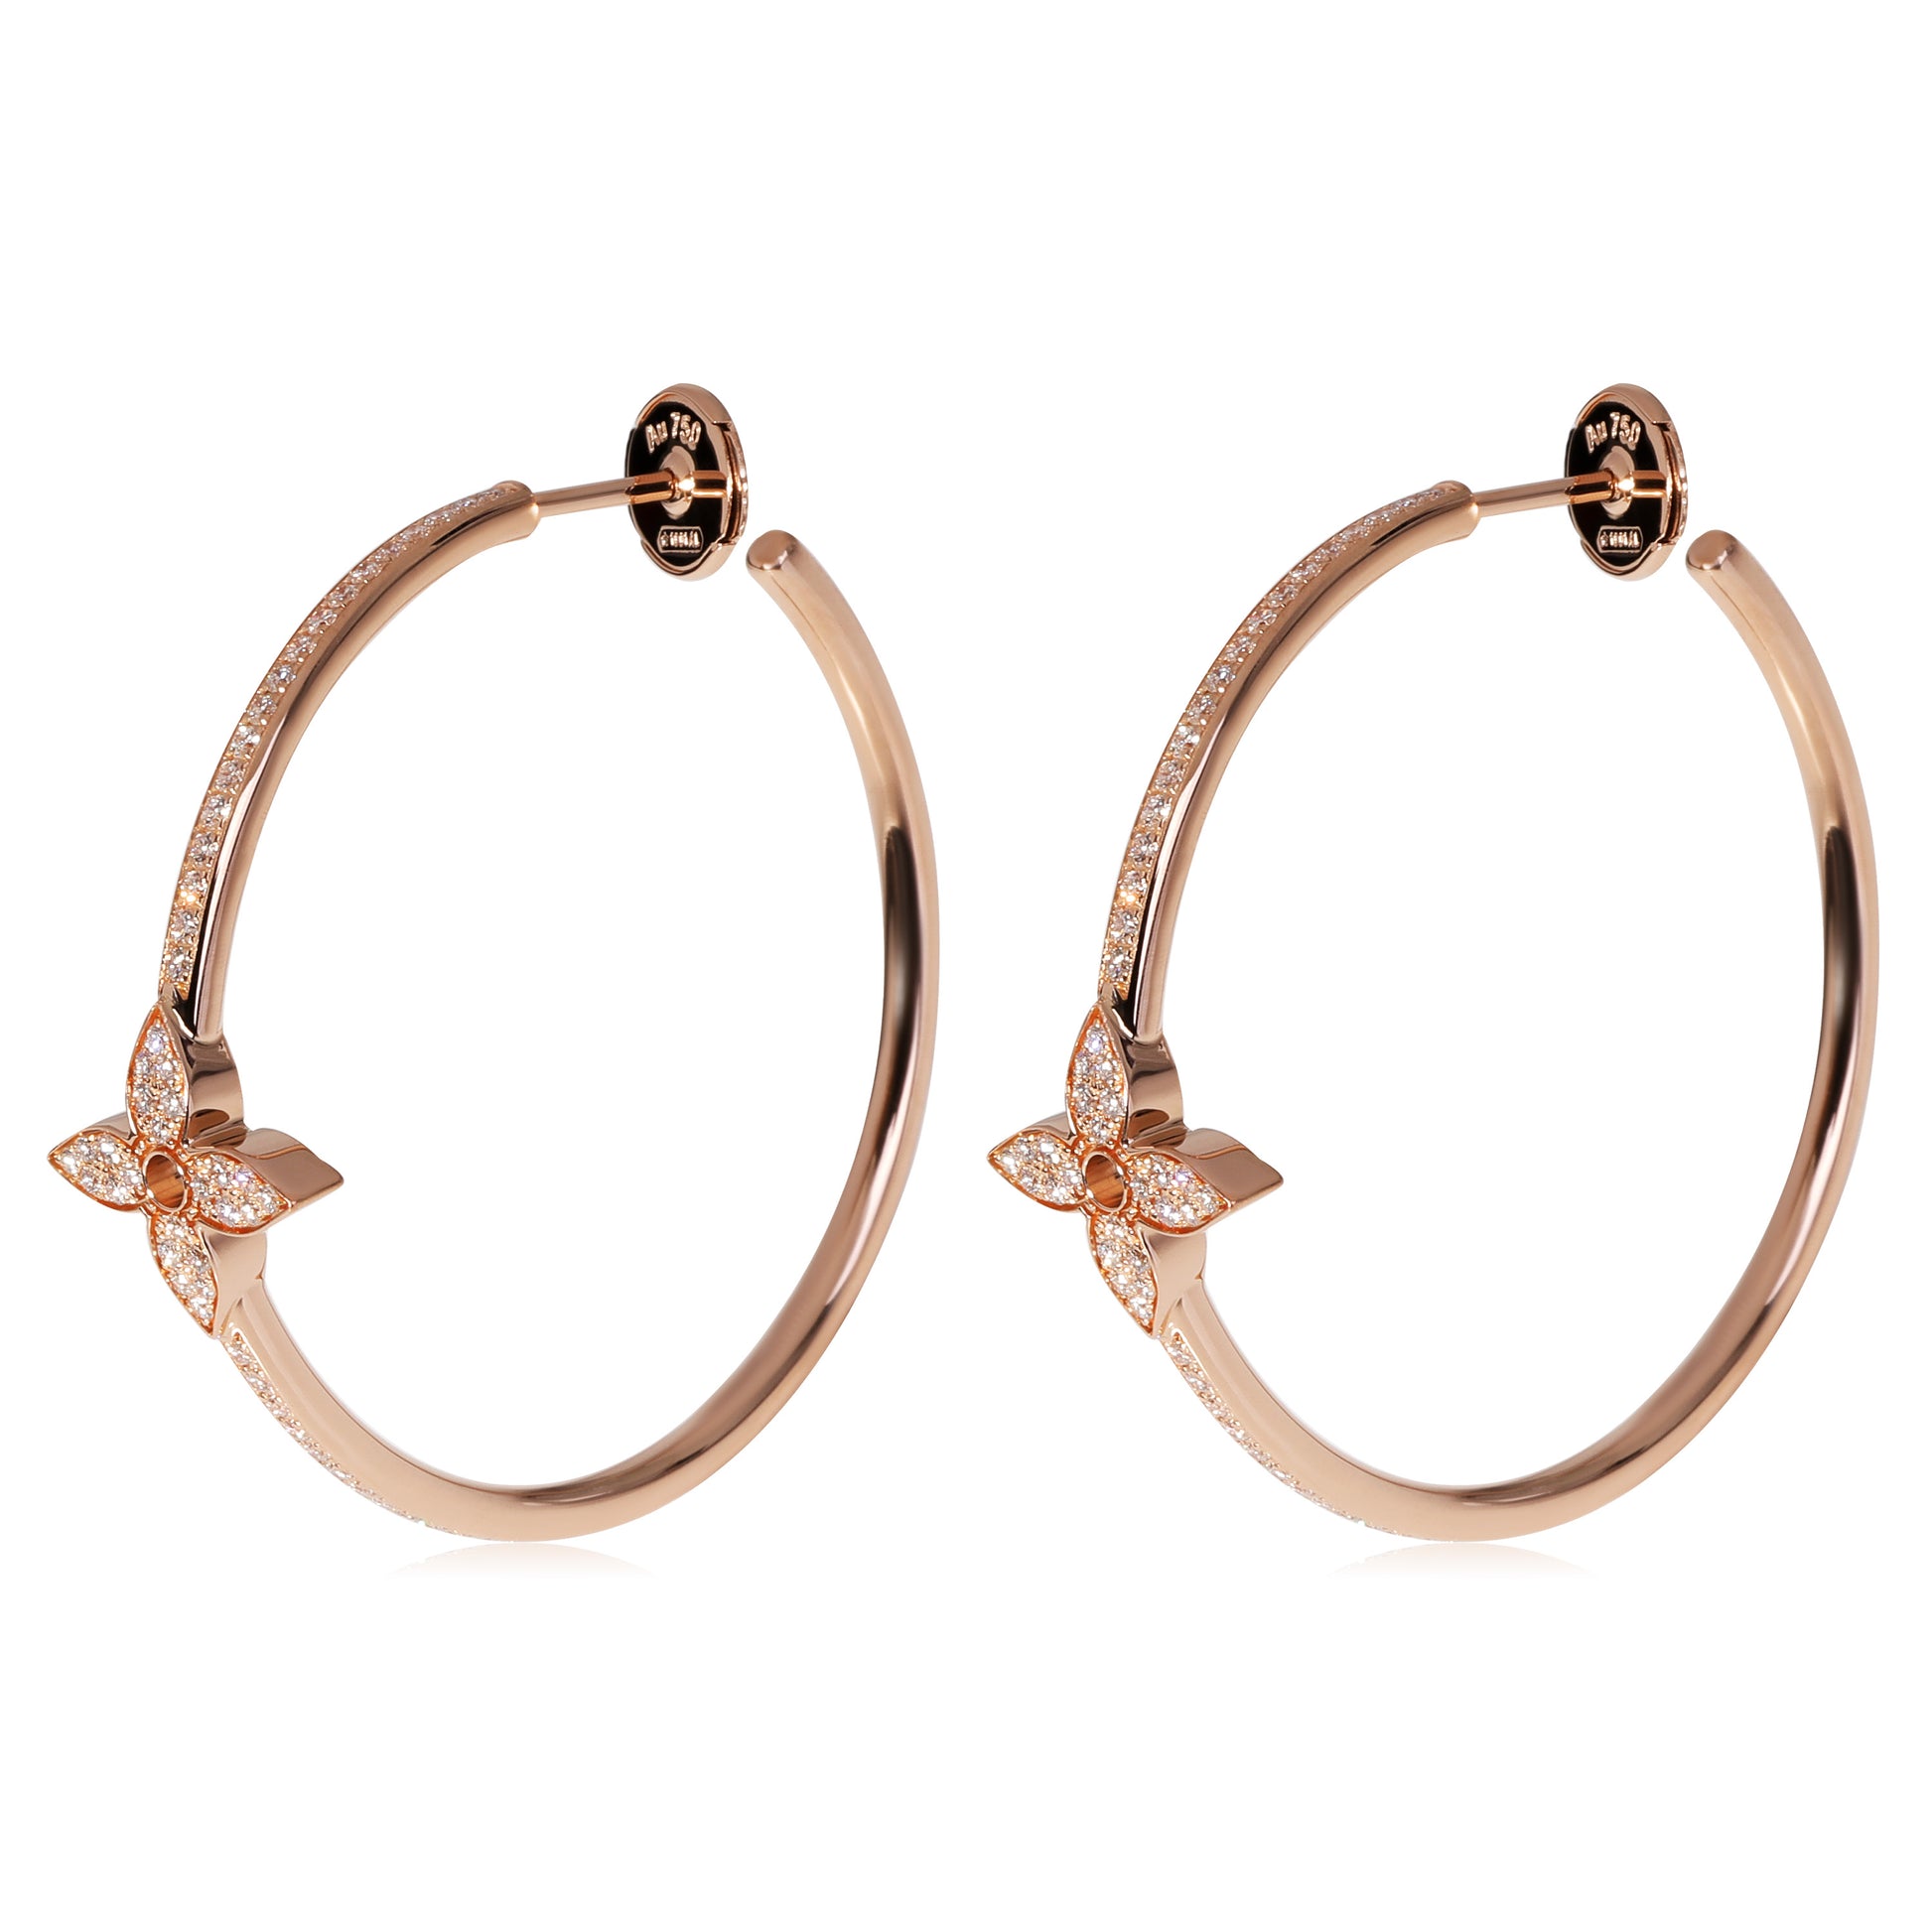 Idylle Blossom Small Hoop, Yellow Gold And Diamond - Per Unit - Categories